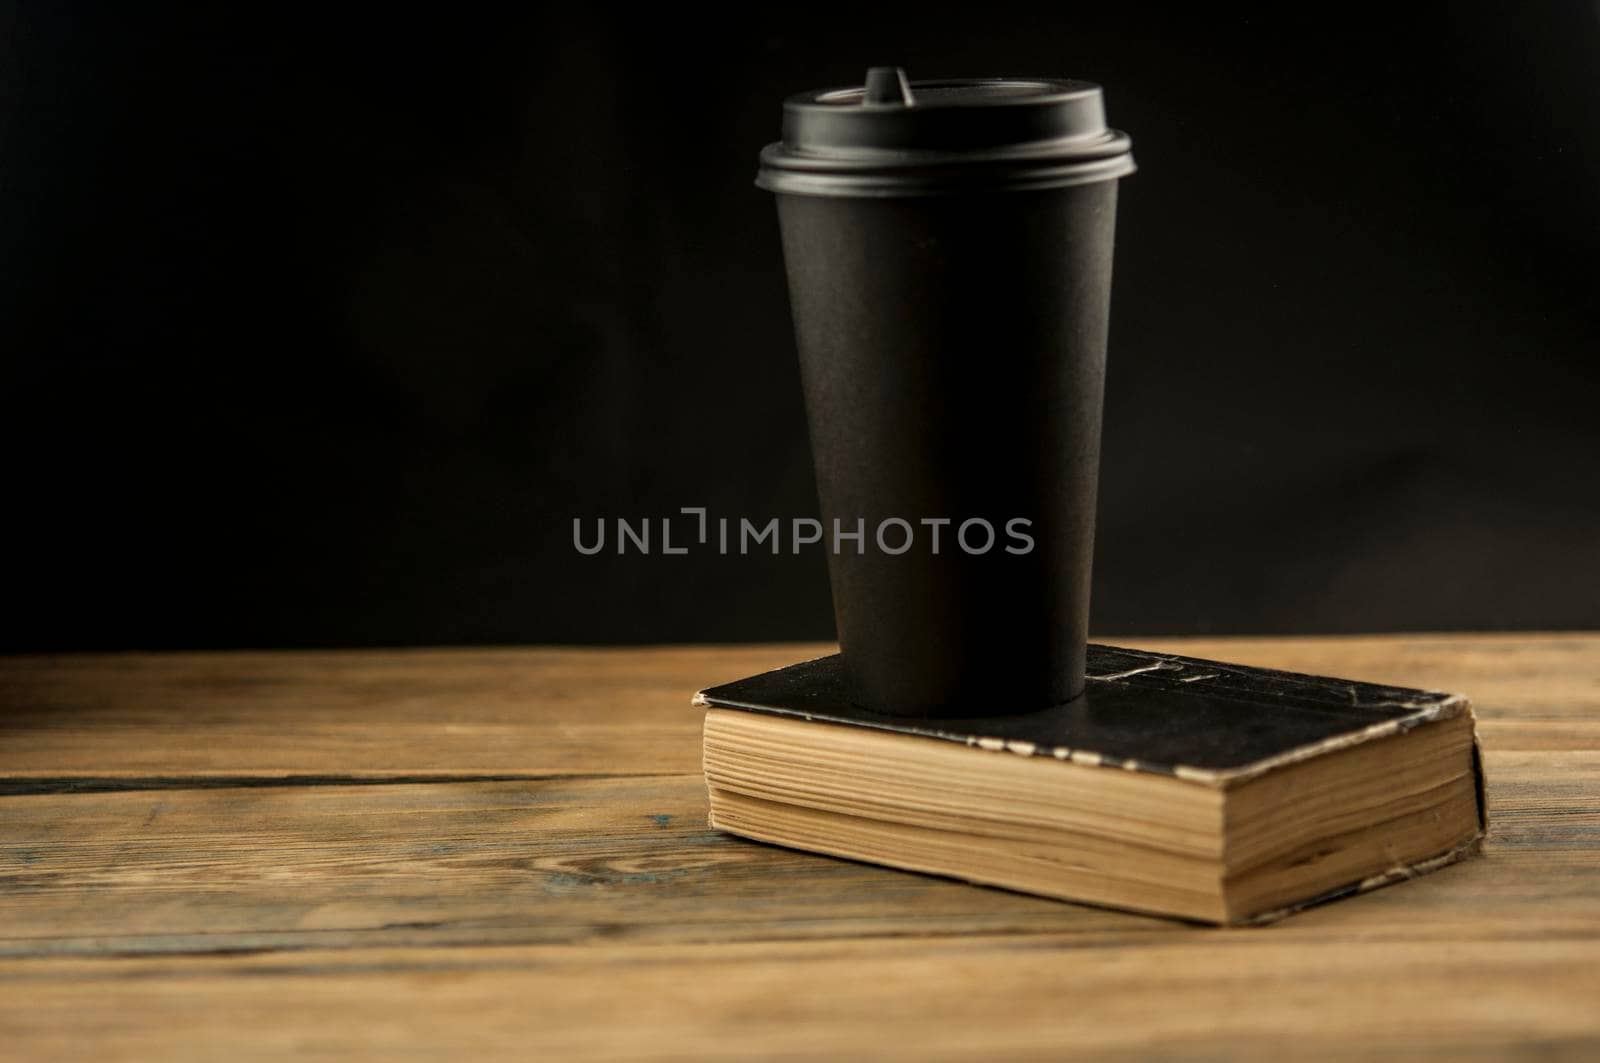 Old book and a cup of coffee in a disposable paper cup on a wooden table by inxti